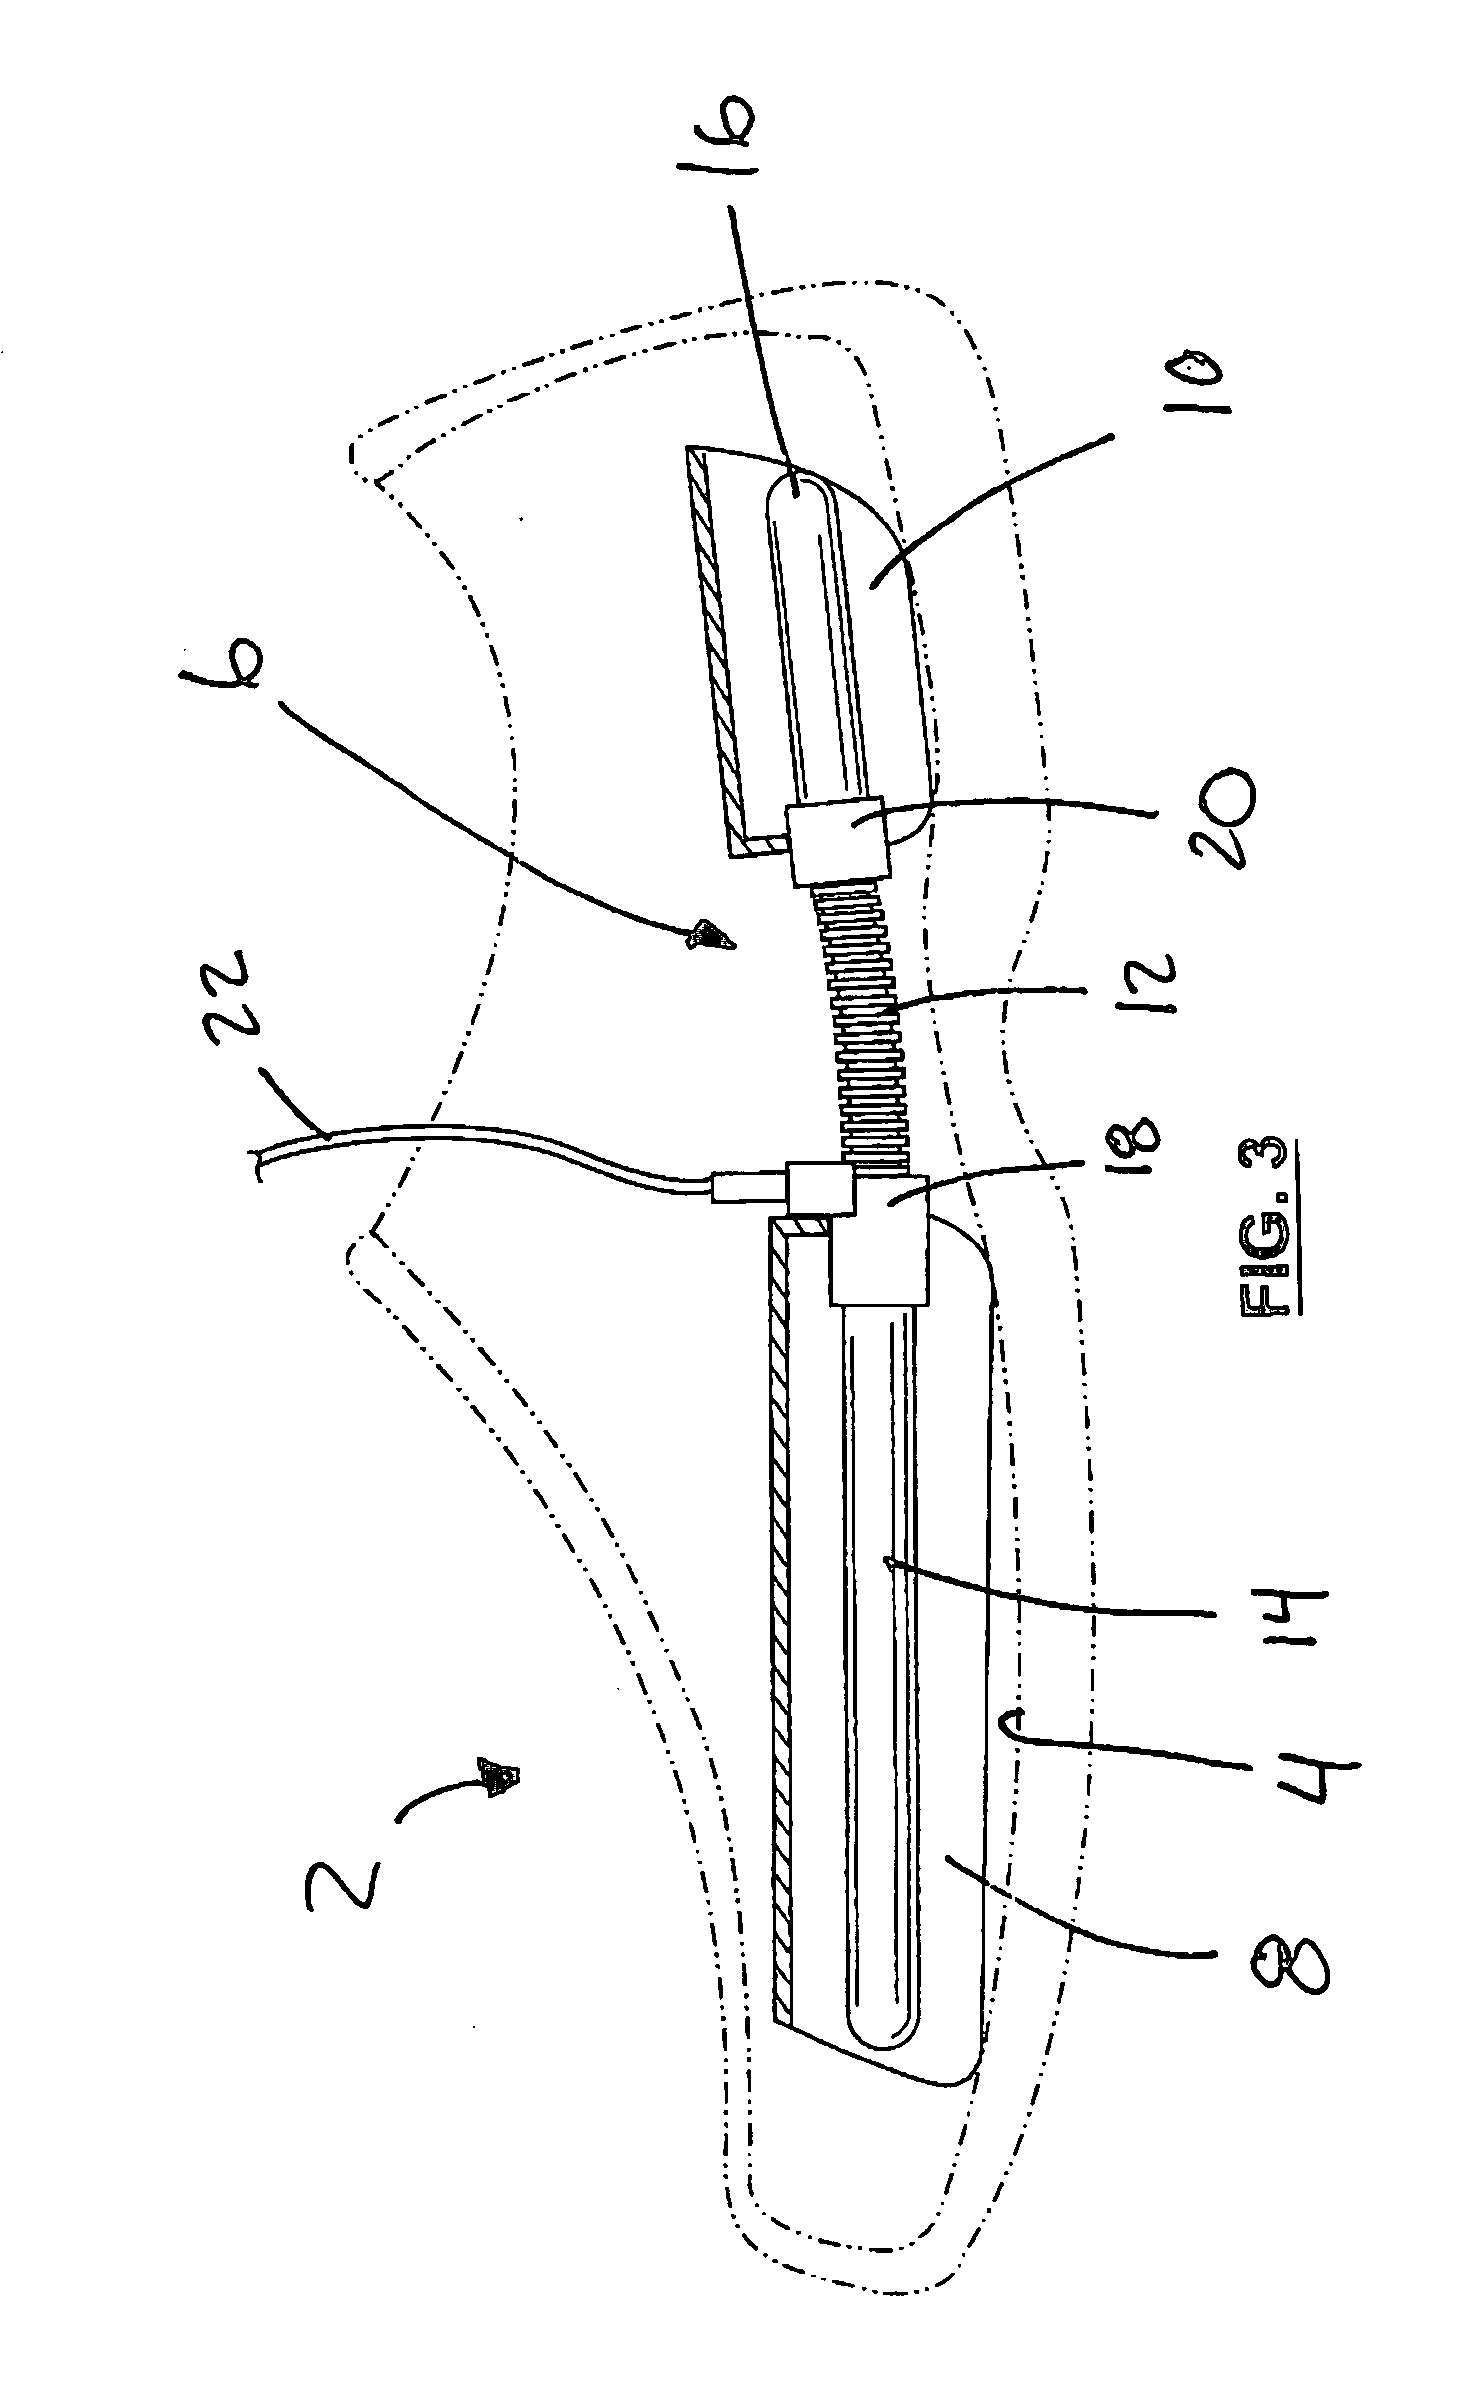 Apparatus and method of disinfecting footwear